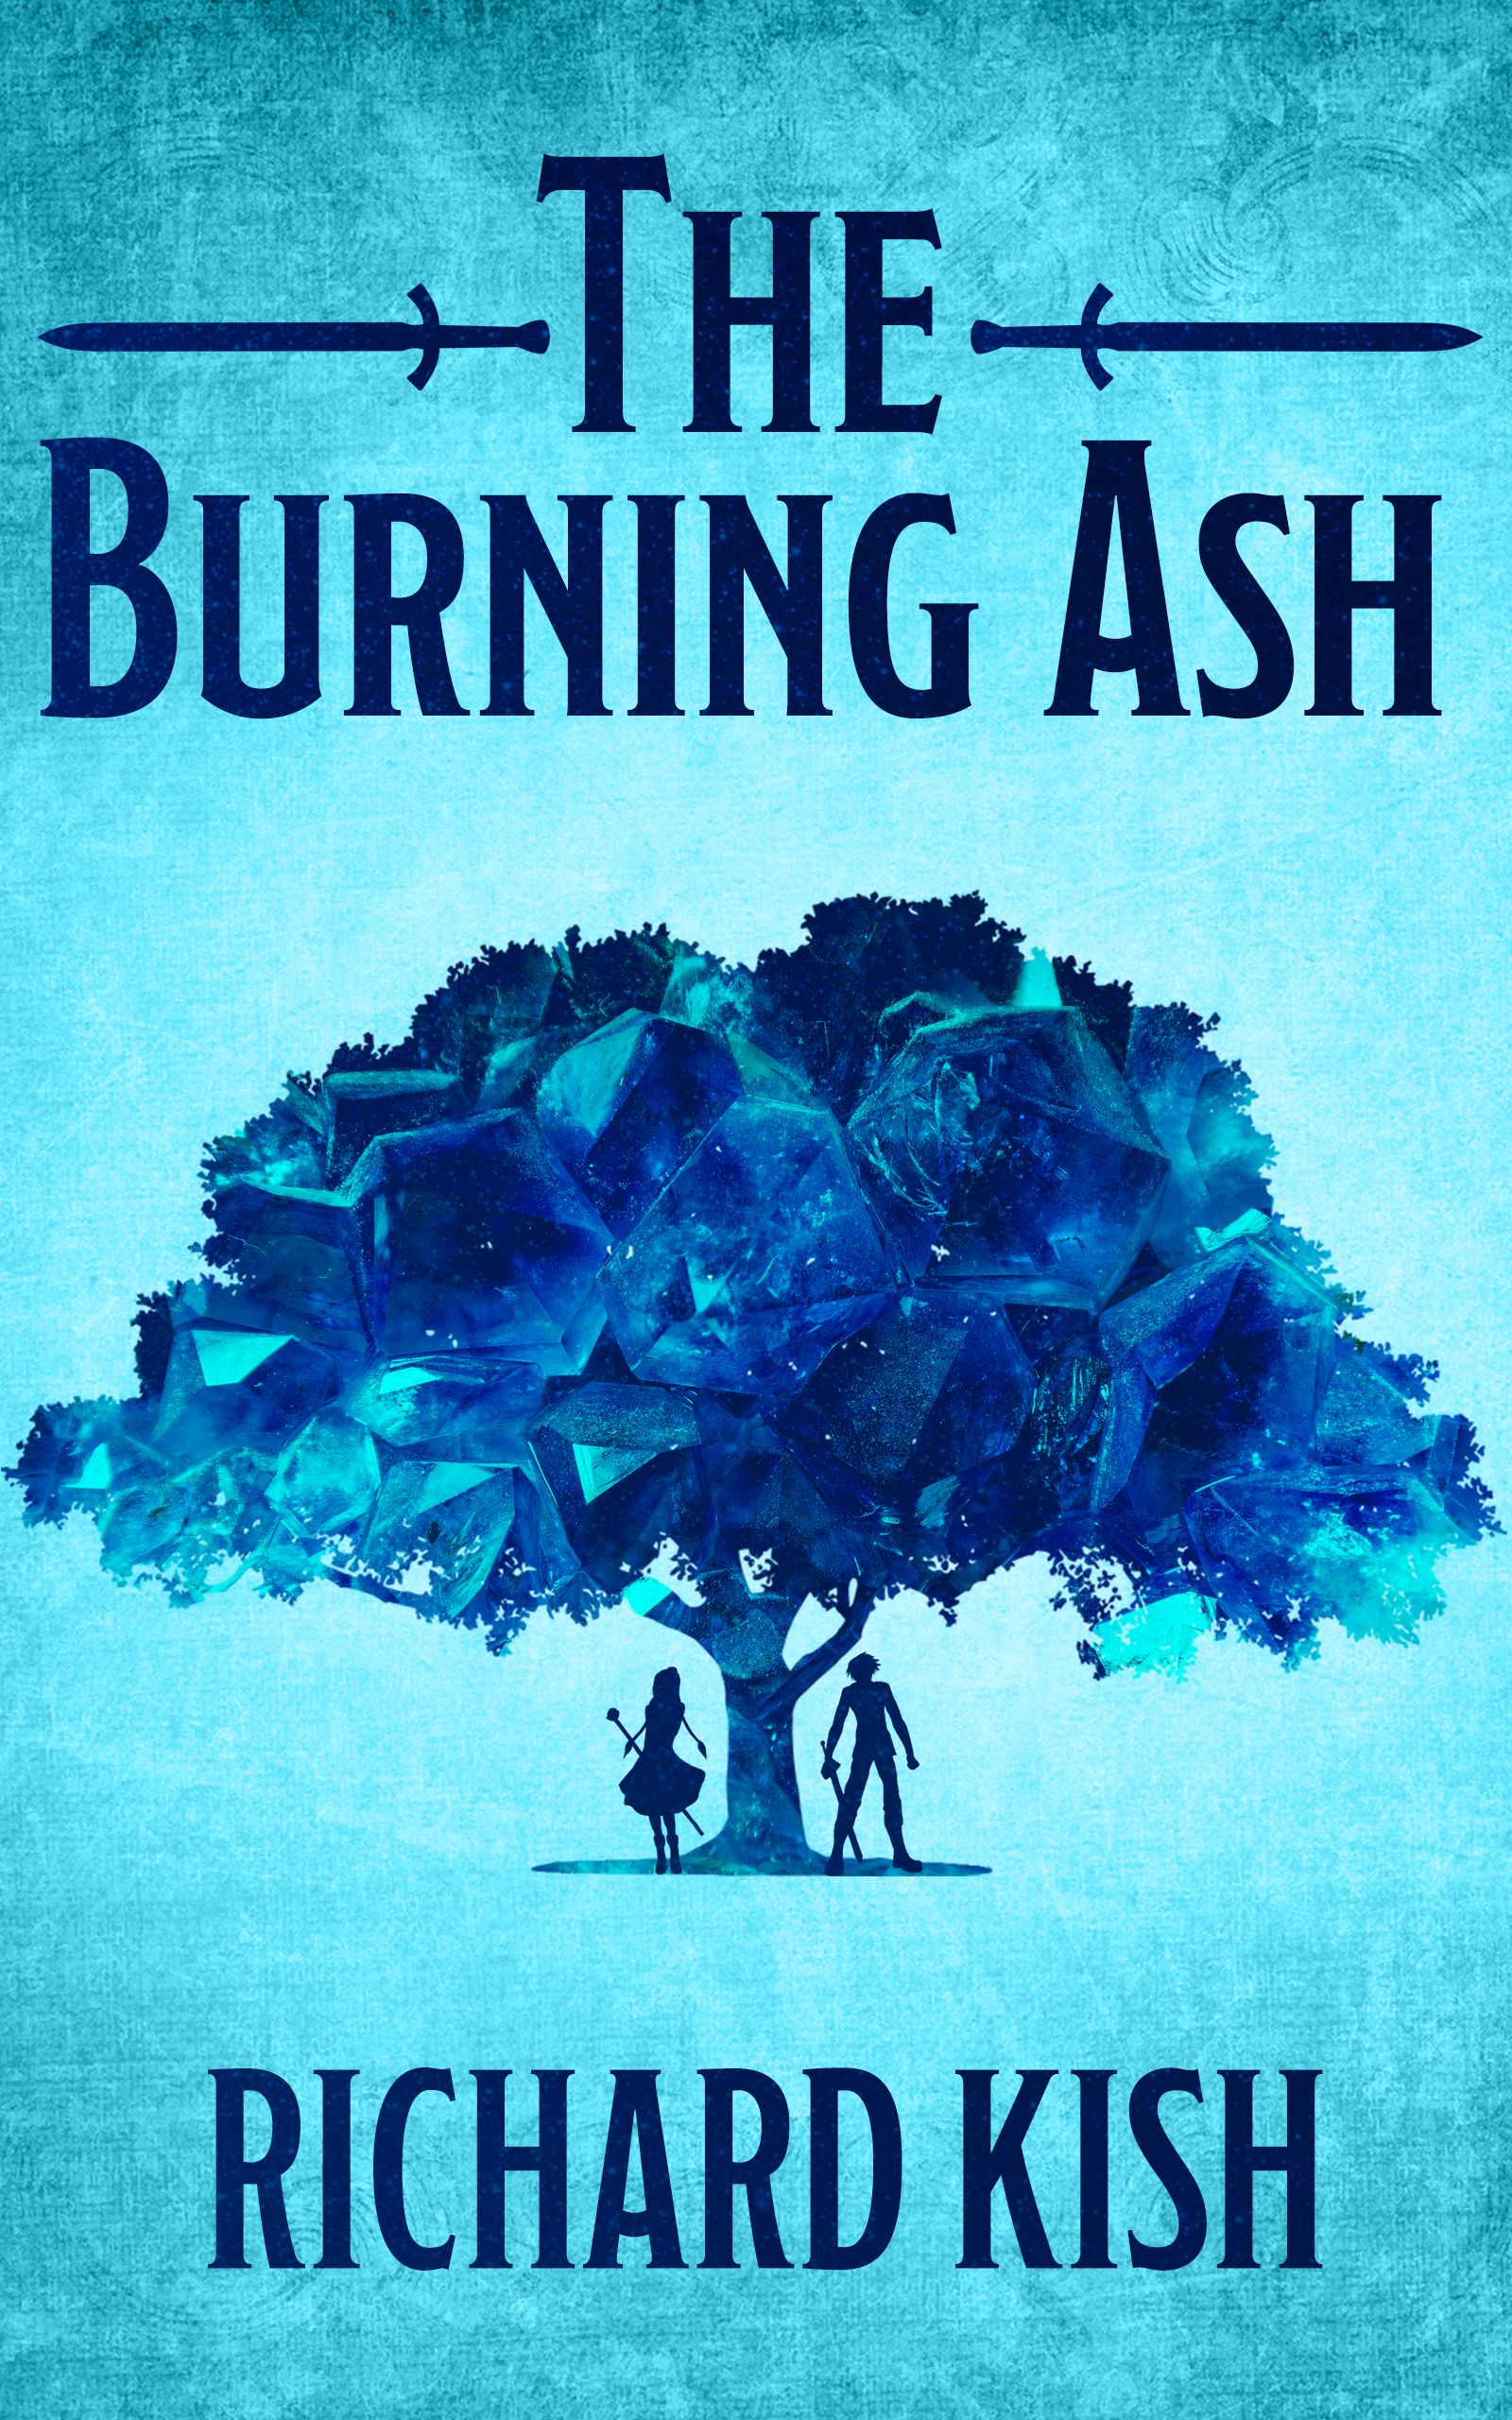 The Front Cover of The Burning Ash